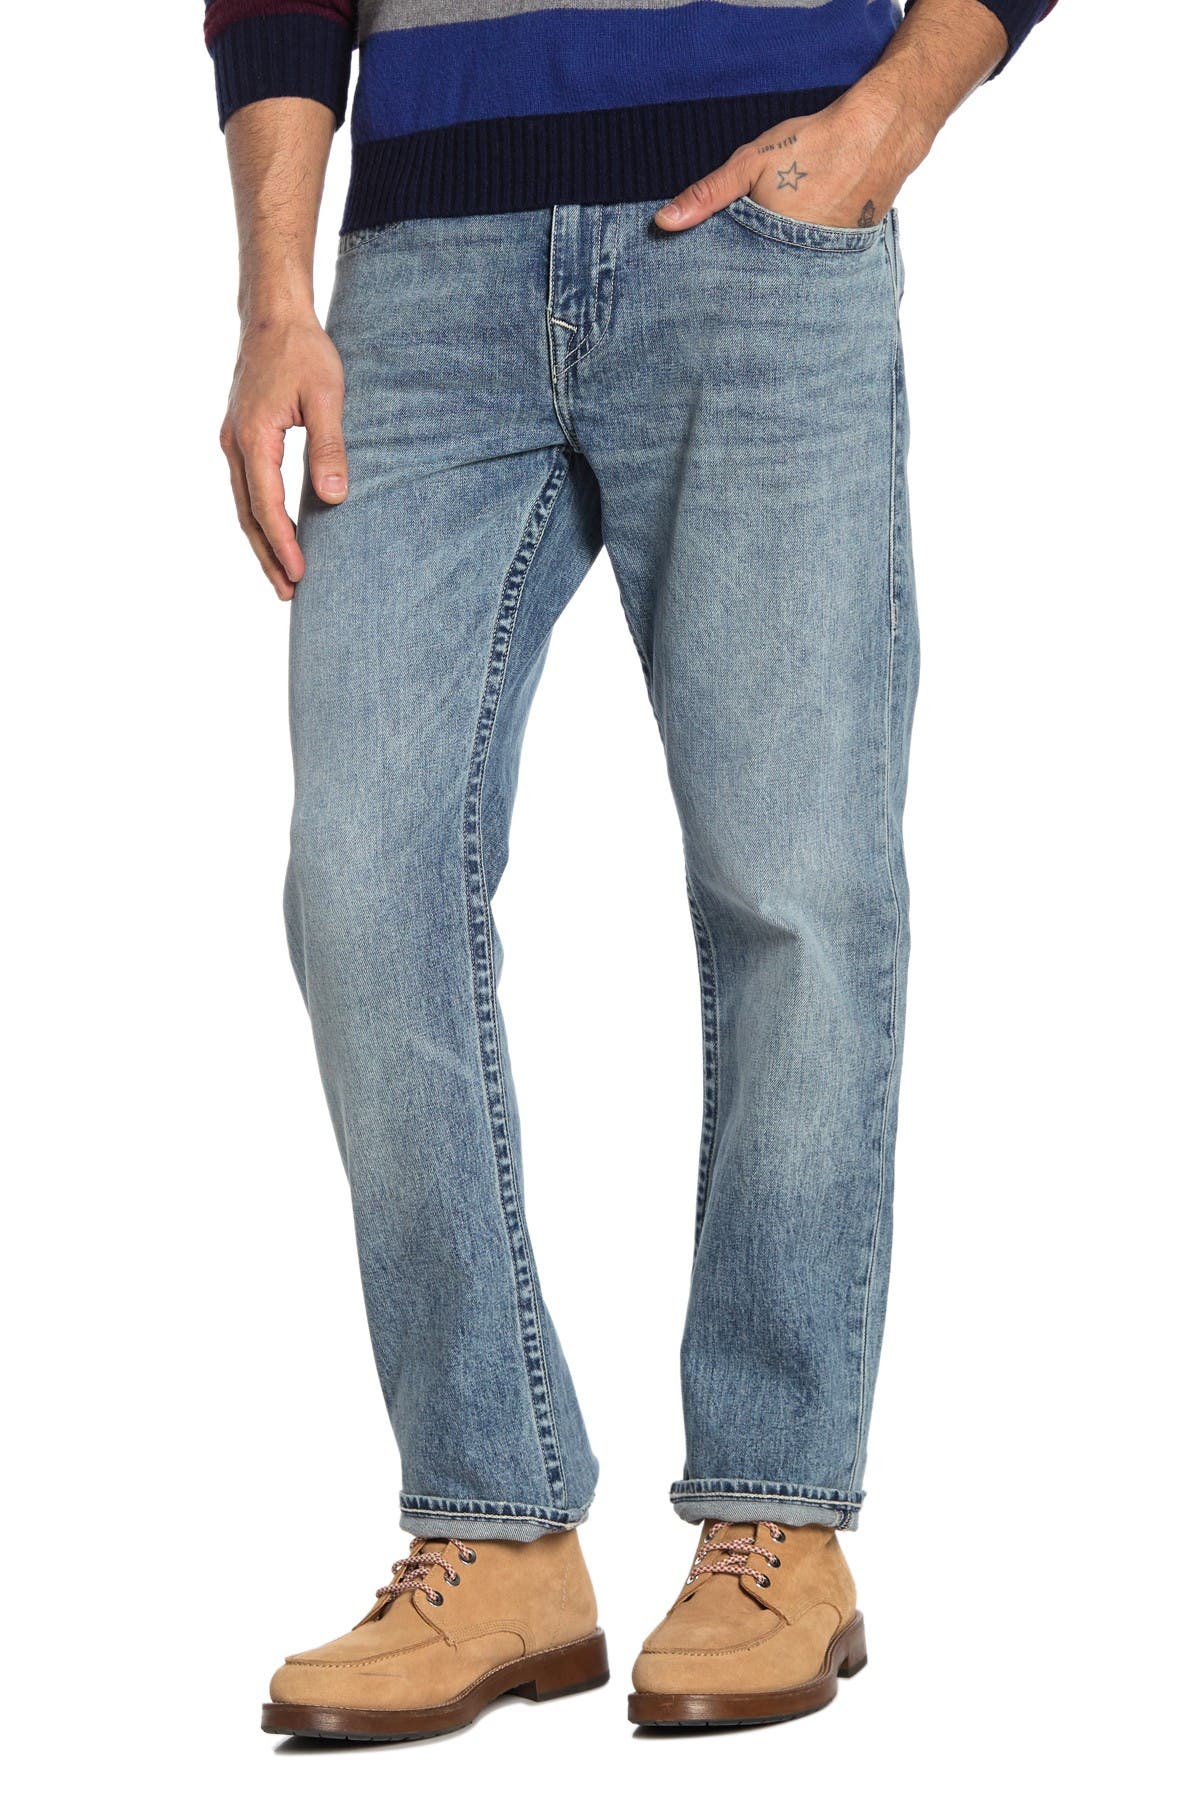 true religion geno relaxed slim fit jeans